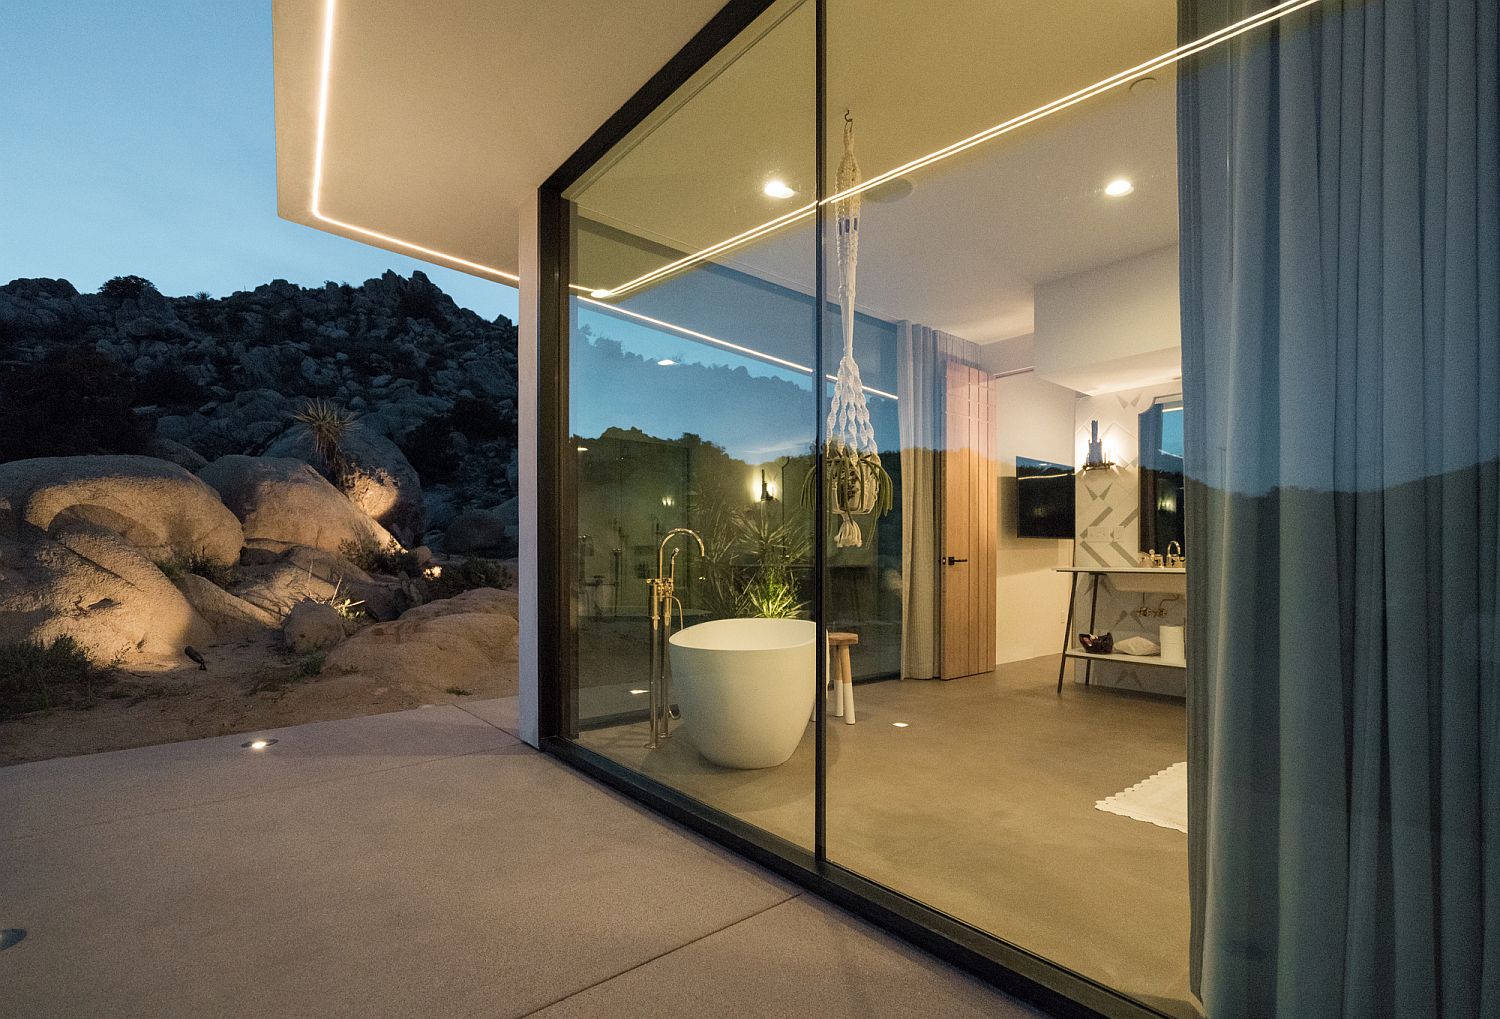 Floor-to-ceiling-glass-walls-open-up-the-interior-to-the-view-outside